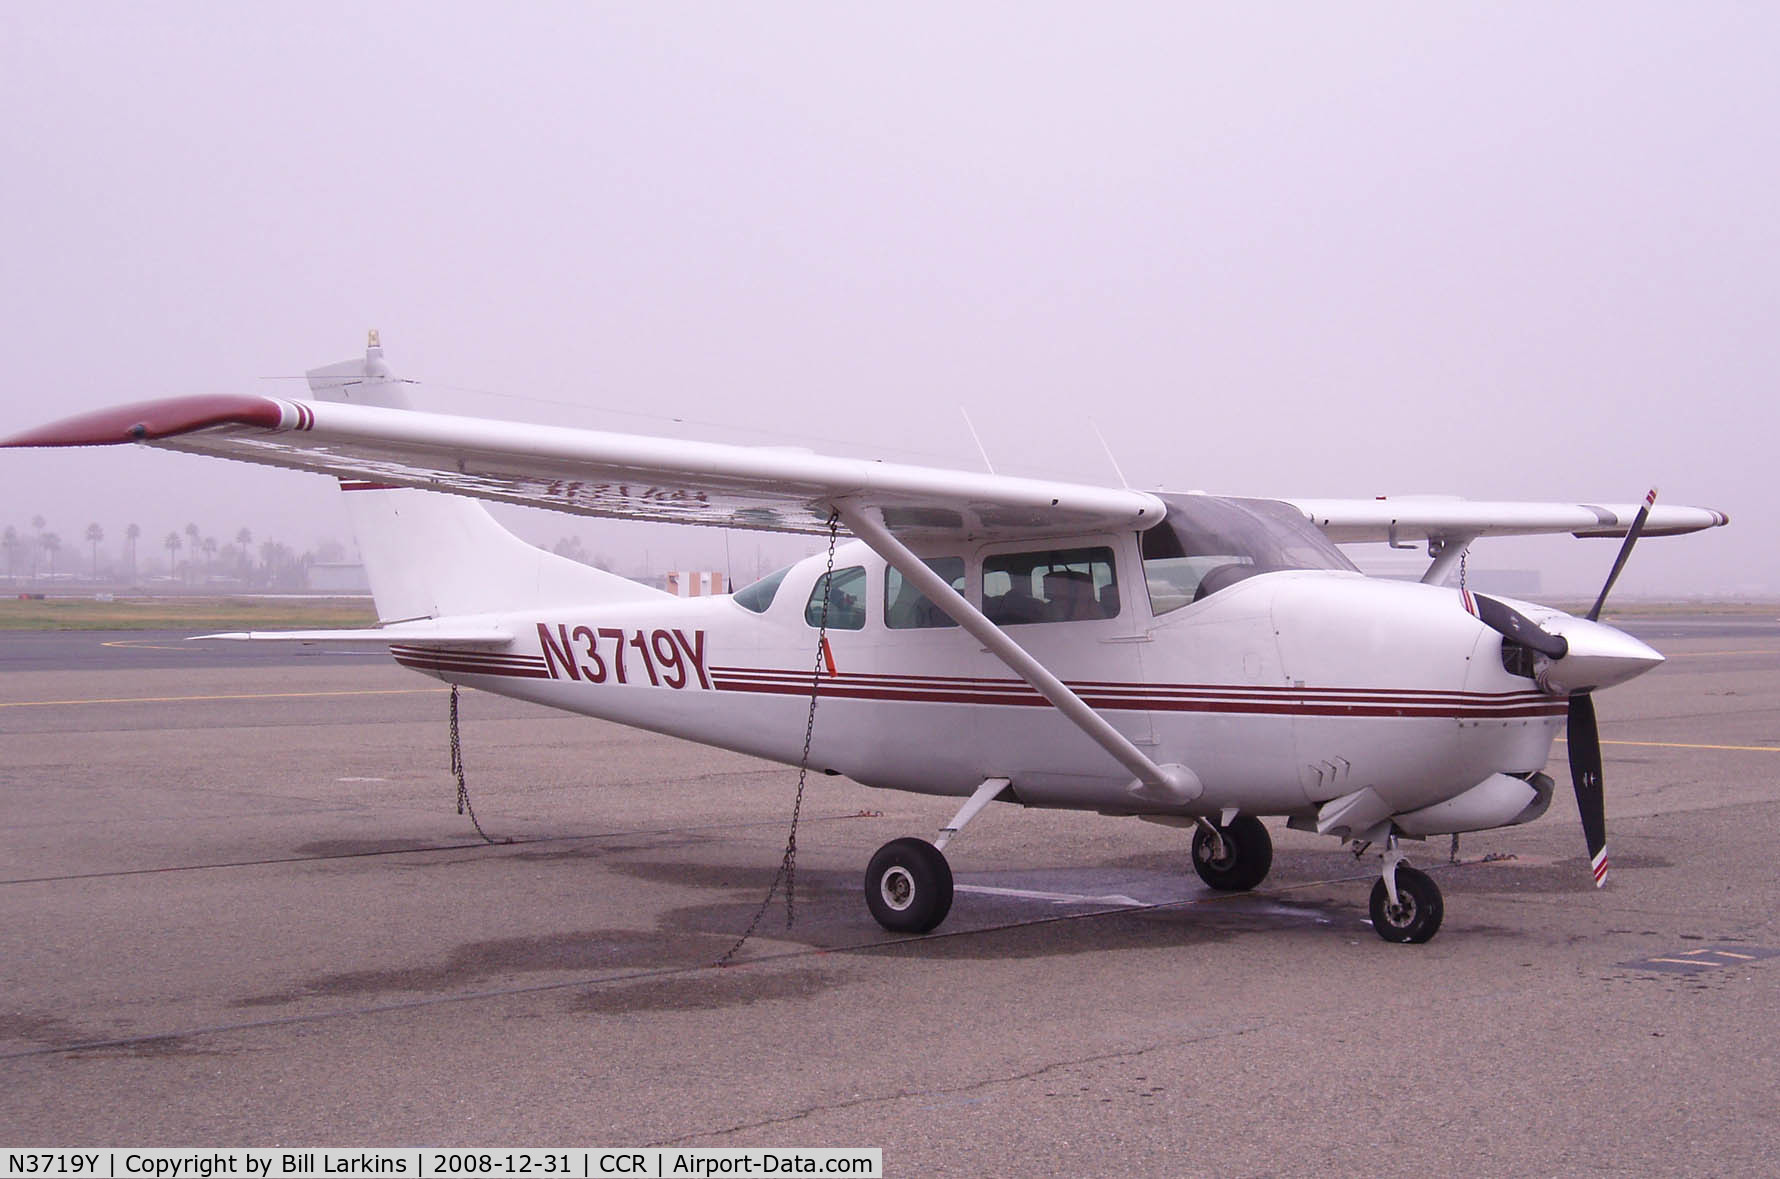 N3719Y, 1963 Cessna 210C C/N 21058219, Right side view.